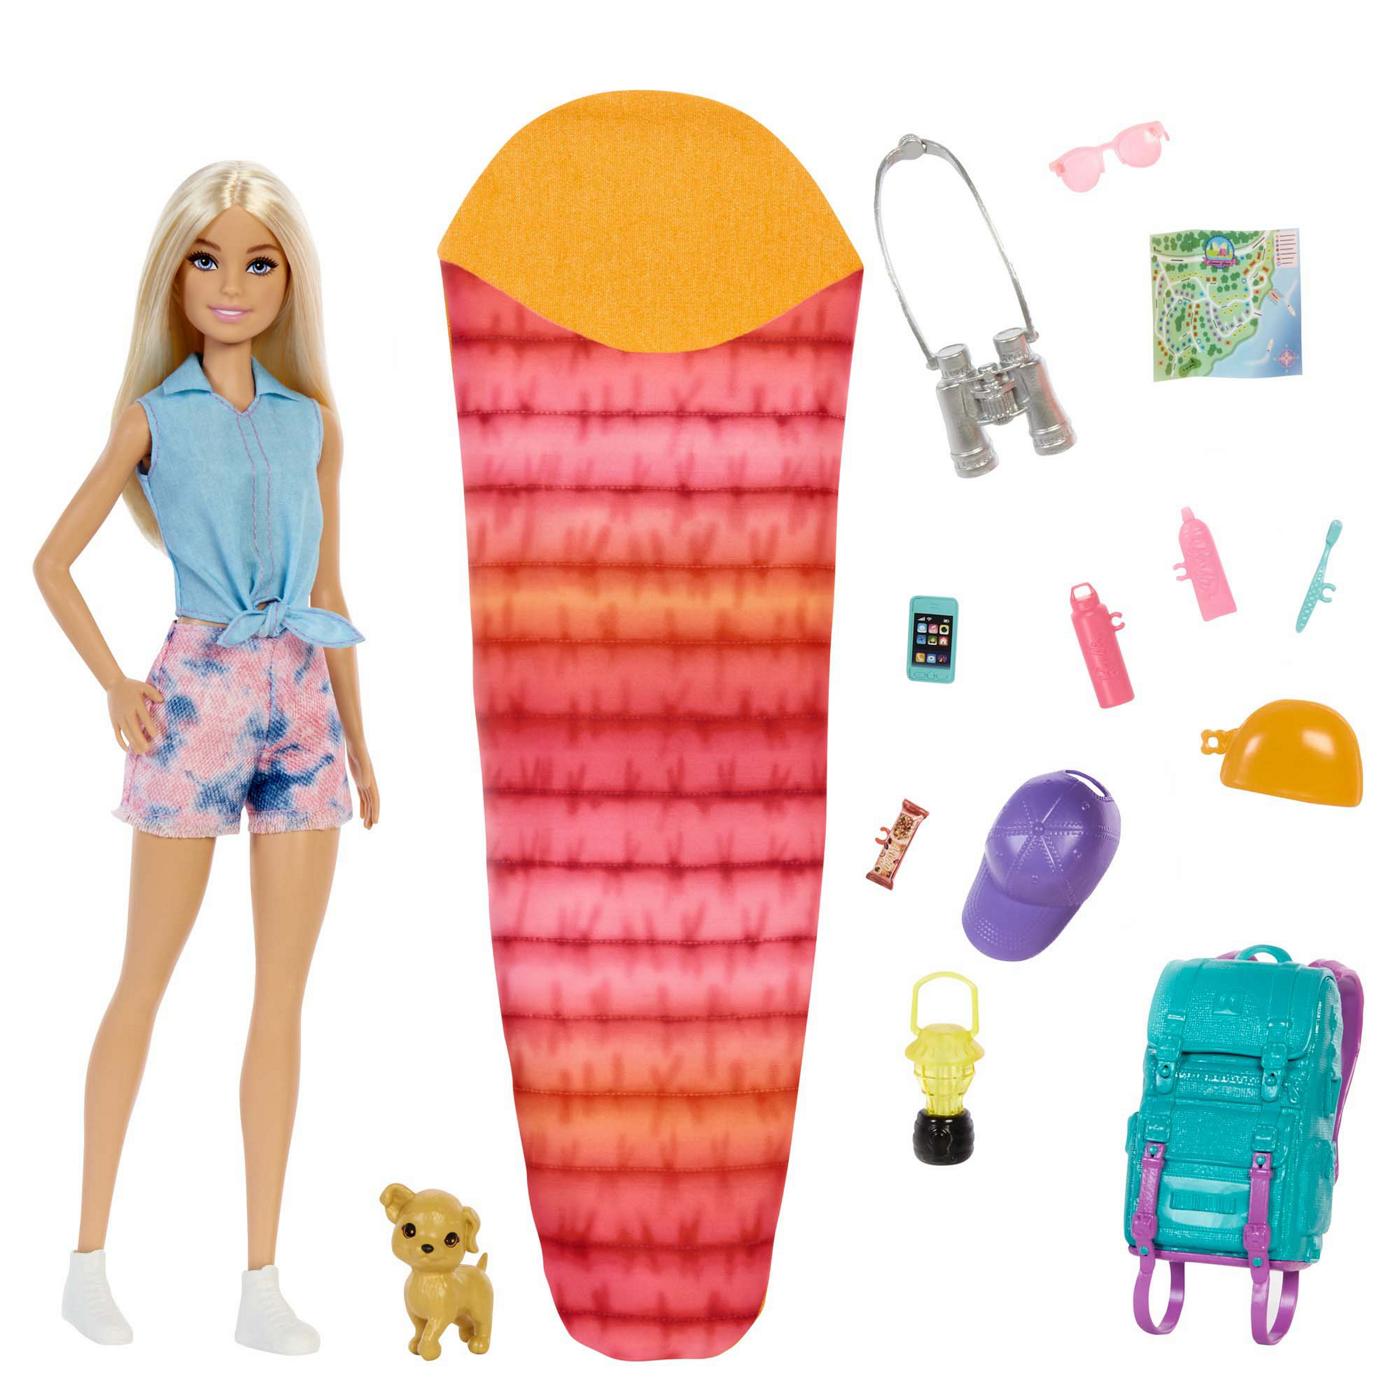 Barbie Camping Brooklyn Doll - Shop Action Figures & Dolls at H-E-B